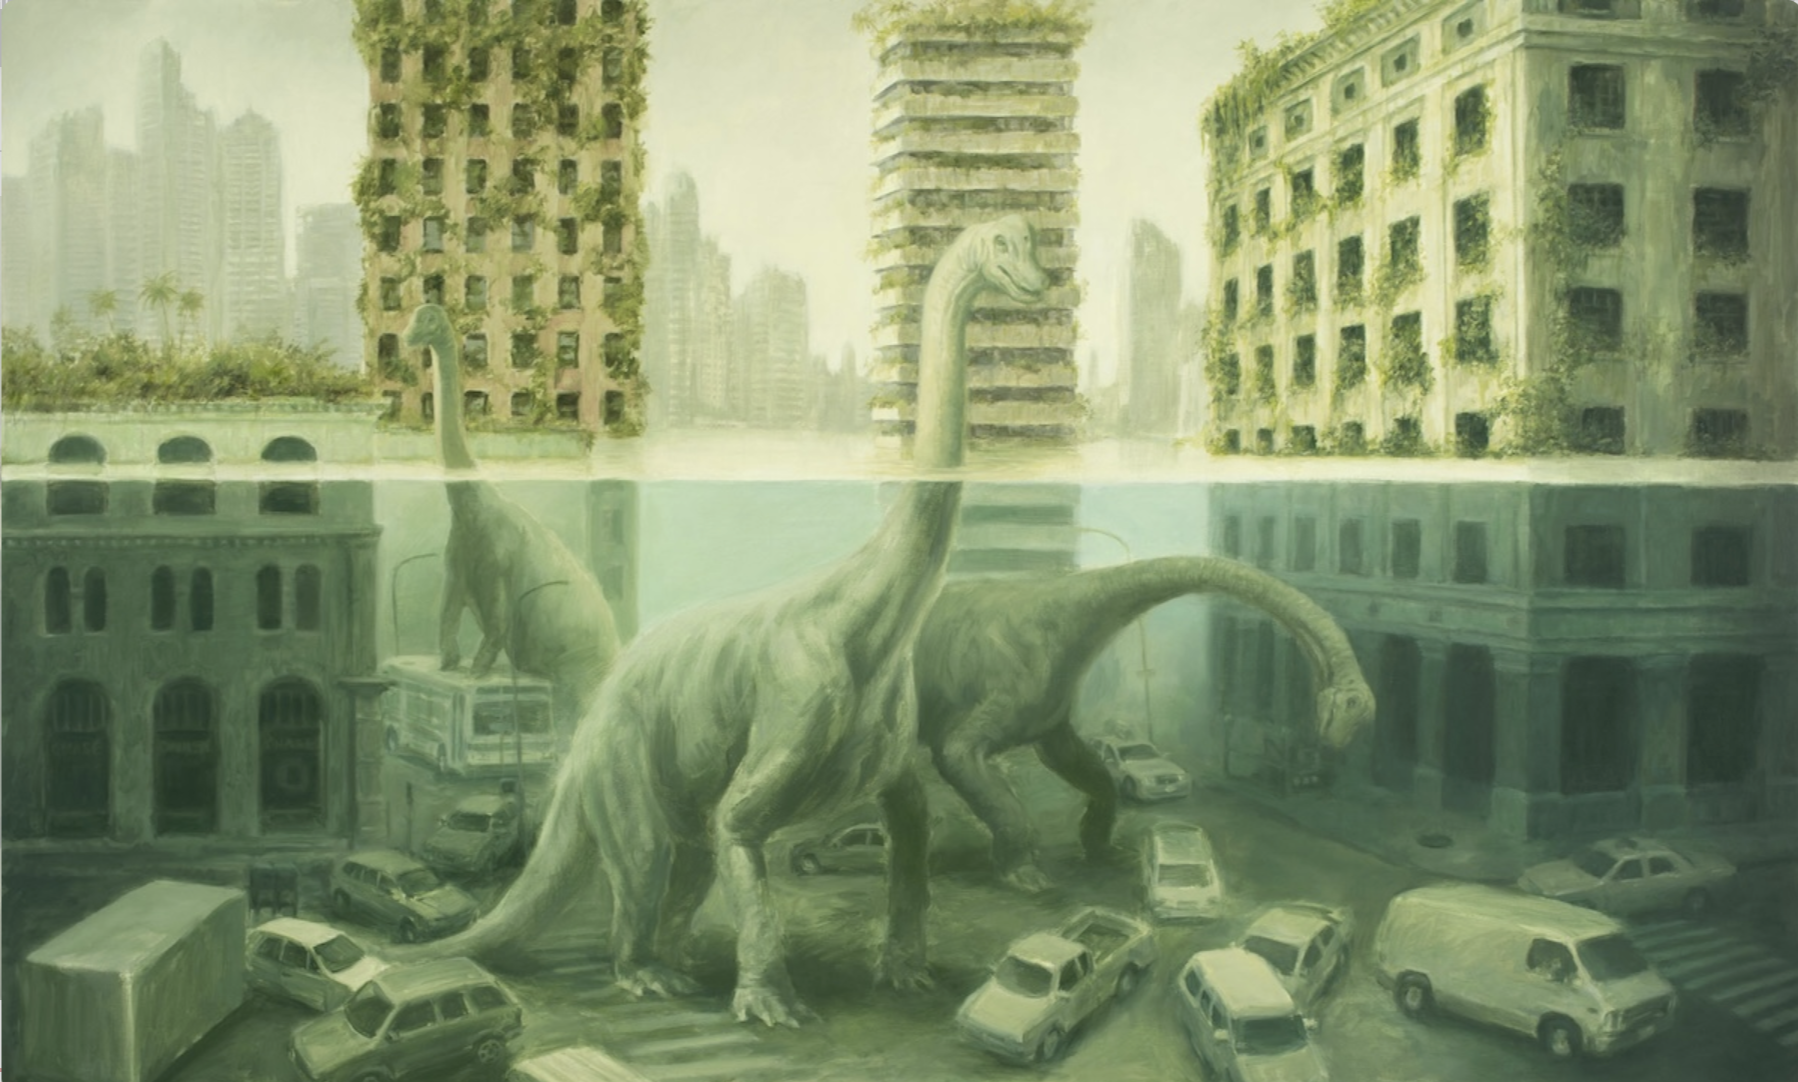 A painting of three long necked dinosaur wading through a flooded city. Under the water, cars are scattered.